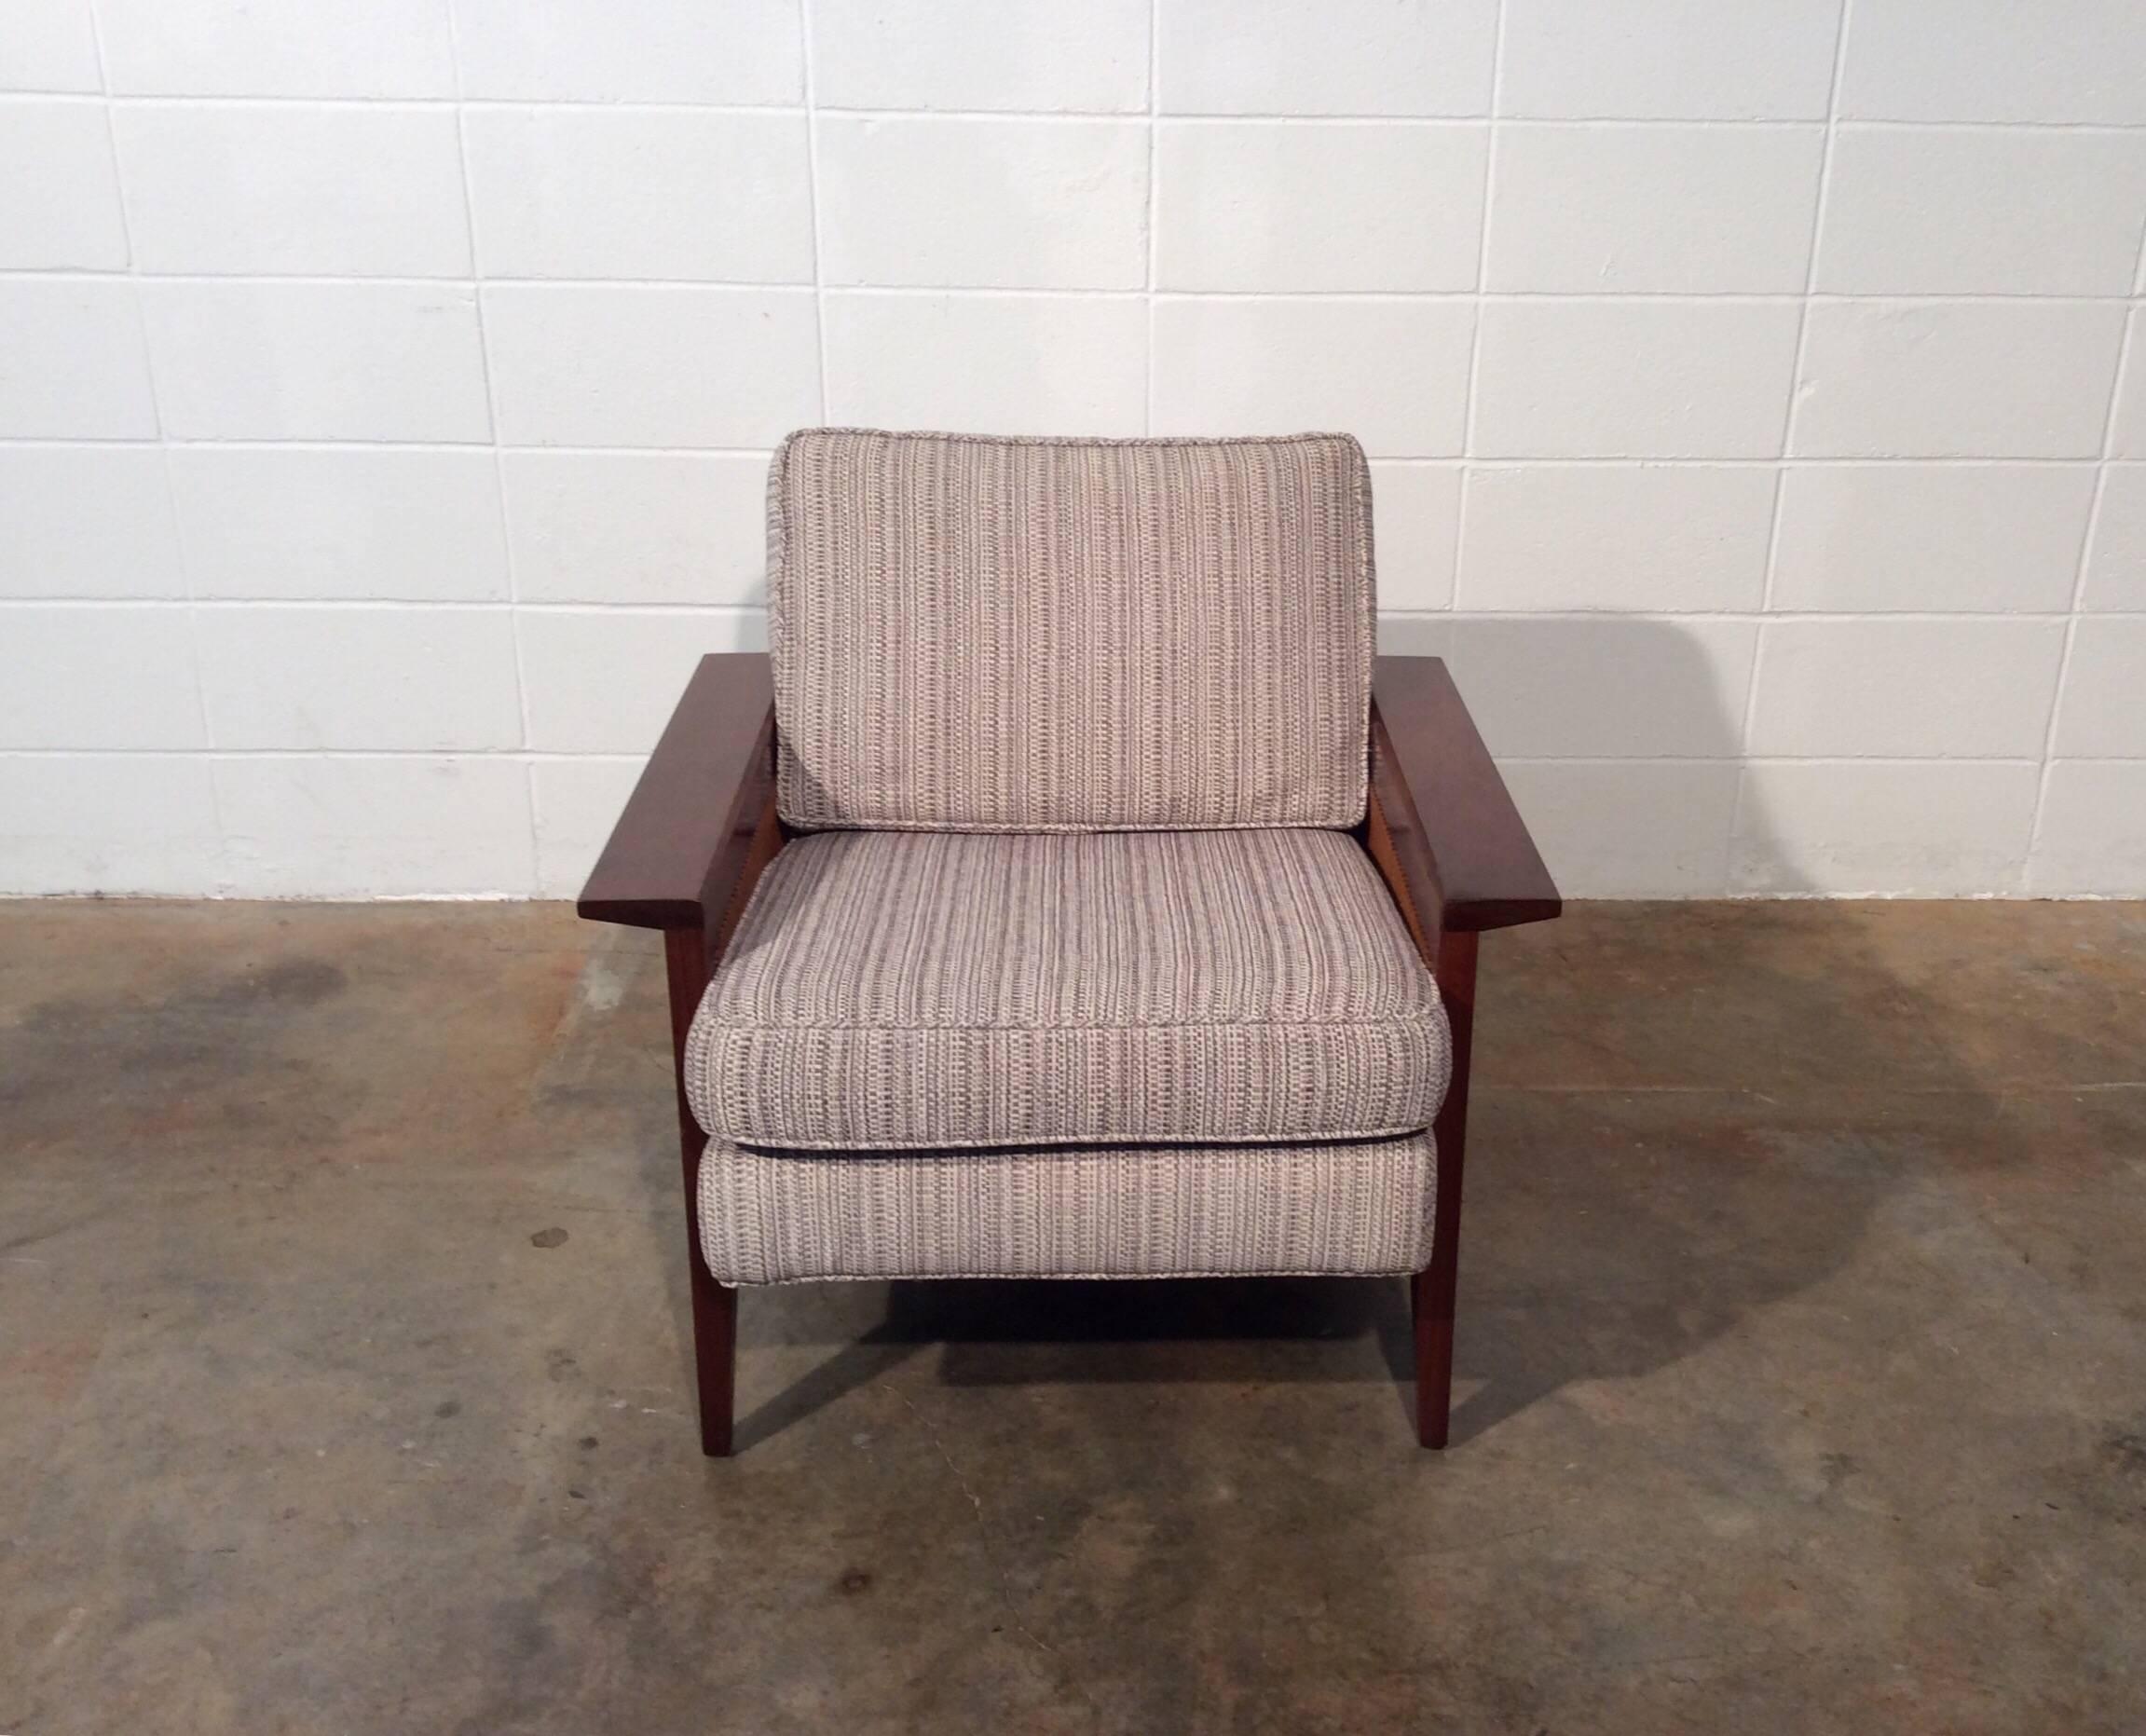 This chair was originally sold by the iconic furniture showroom Galloway's of Tampa. Sadly the Galloway showrooms are now closed but you still have the opportunity to purchase this great piece. The chair was recently professionally restored.